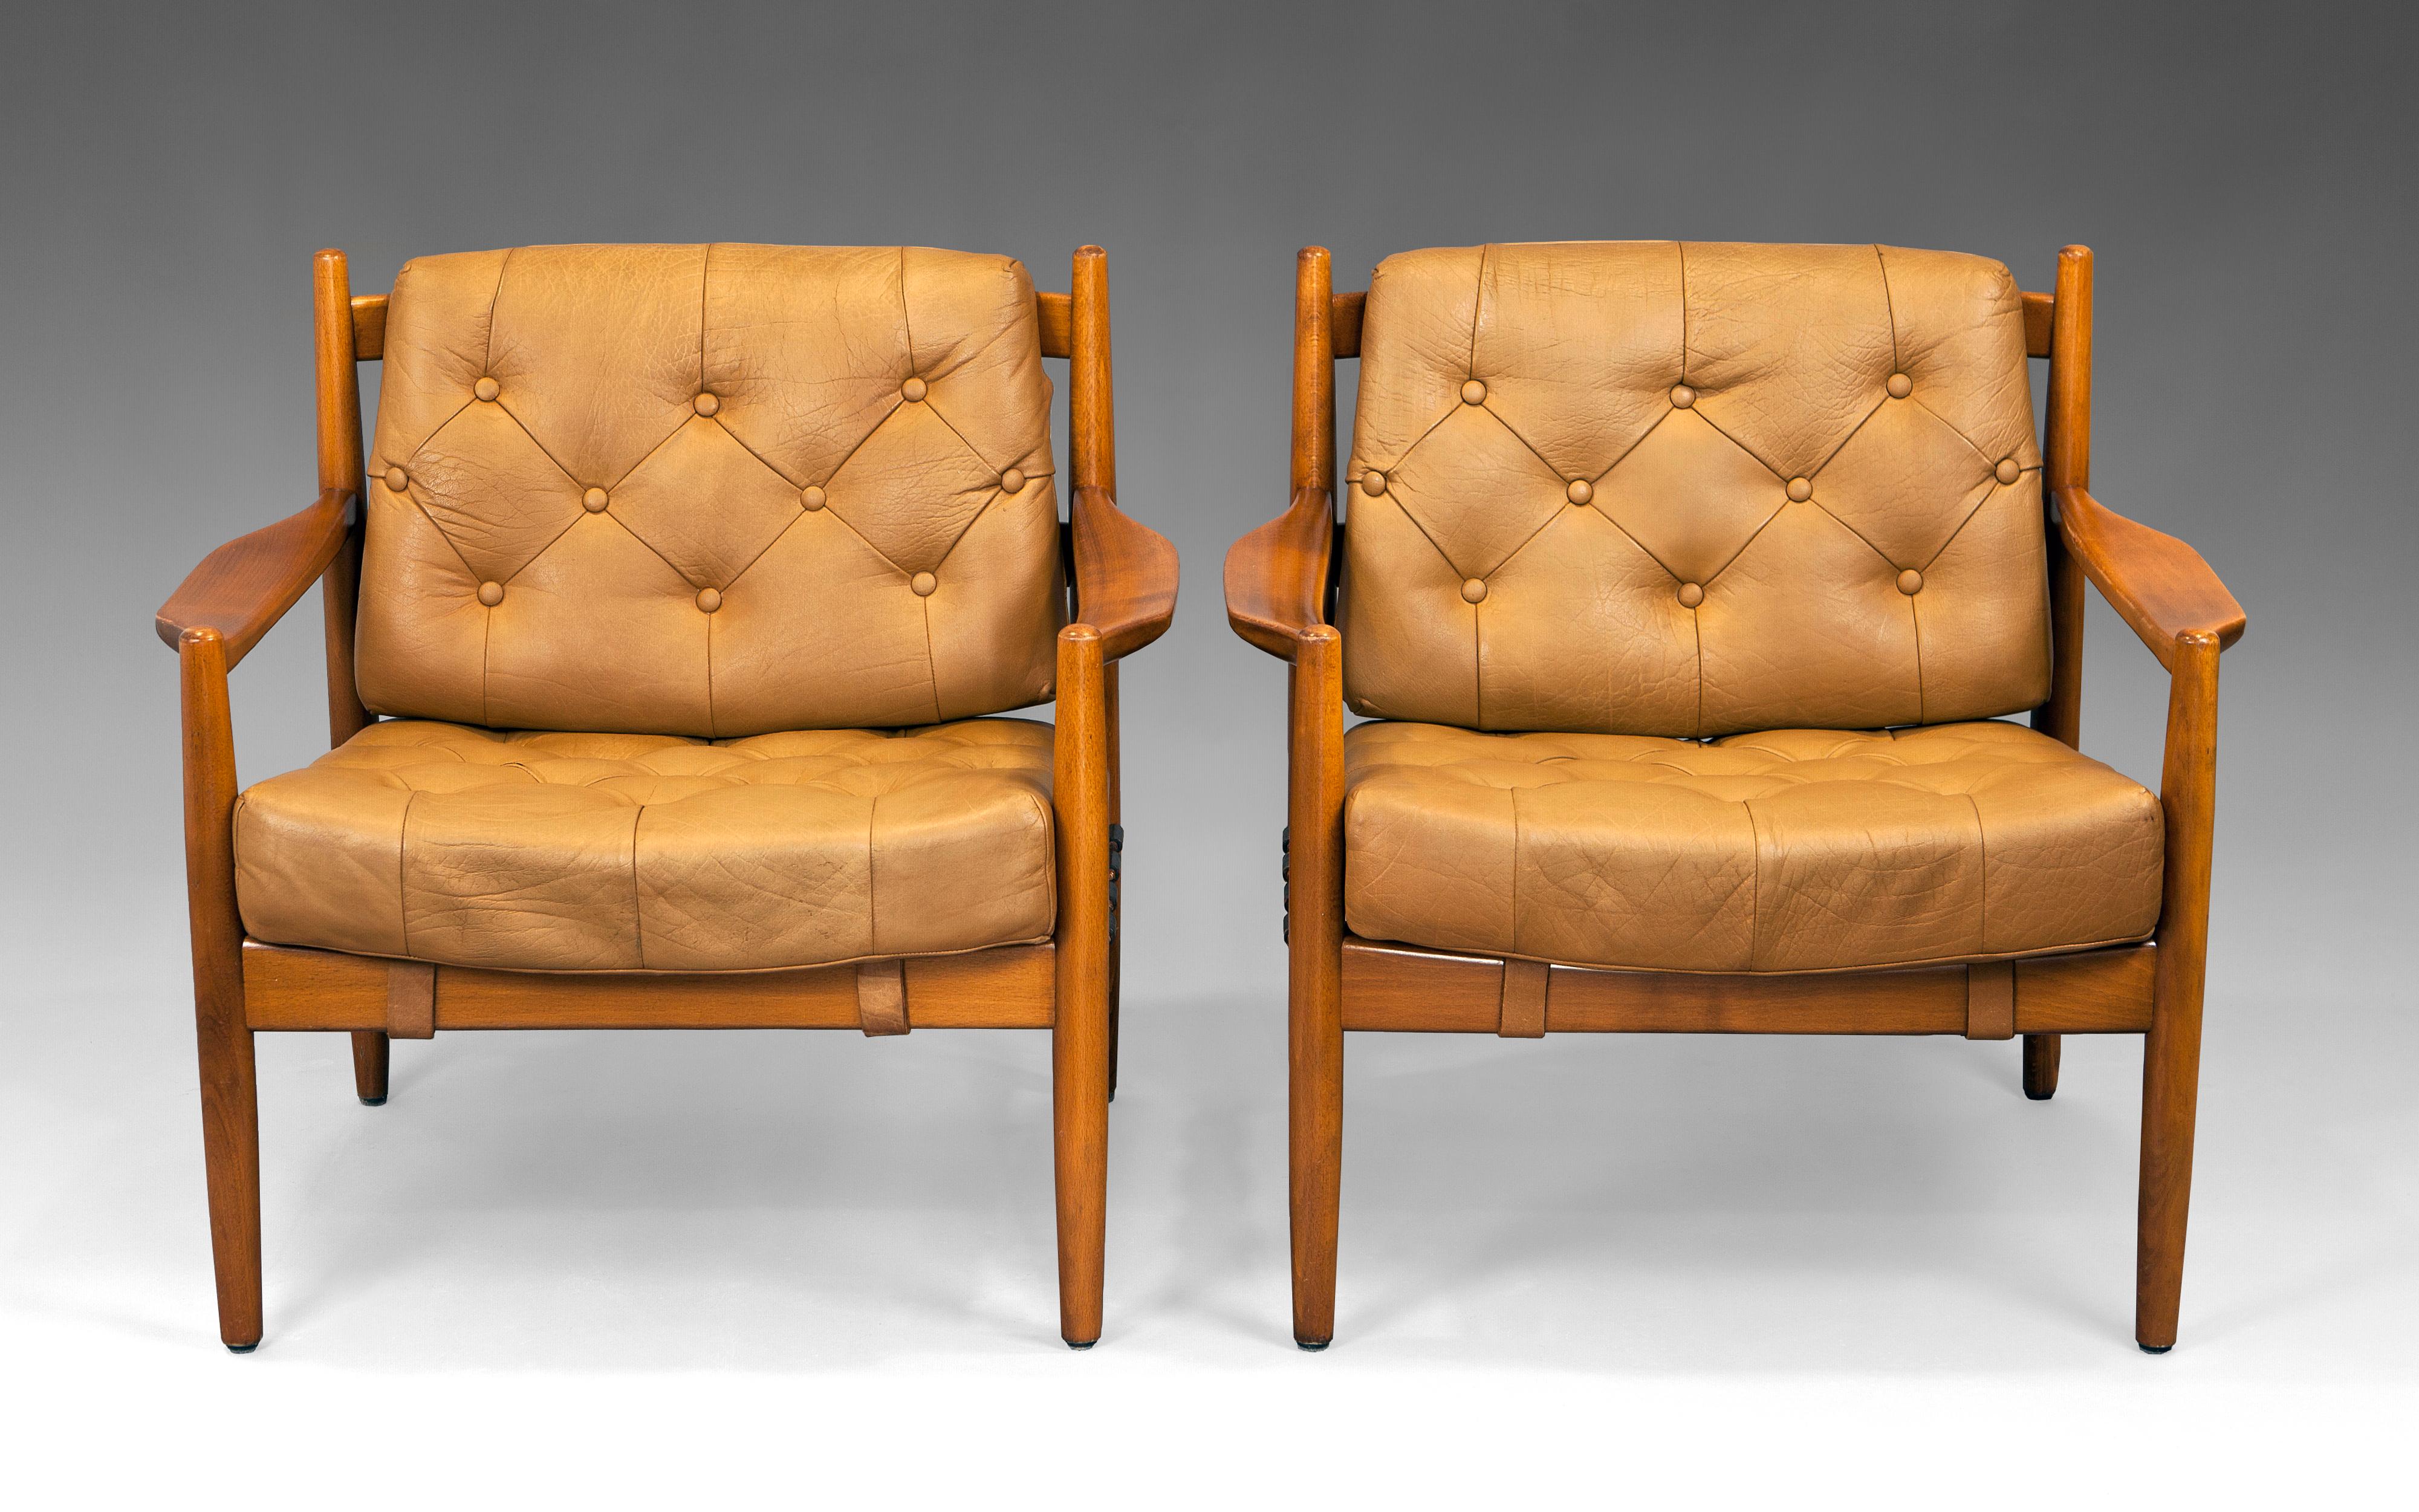 Mid Century modern design, “Läckö” pair of armchairs by Swedish designer Ingemar Thillmark. Manufactured by OPE möbler. Sweden 1960s. Stained beech frame. Deep padded seats dressed in leather with use patina.

Fully restored wooden structure and